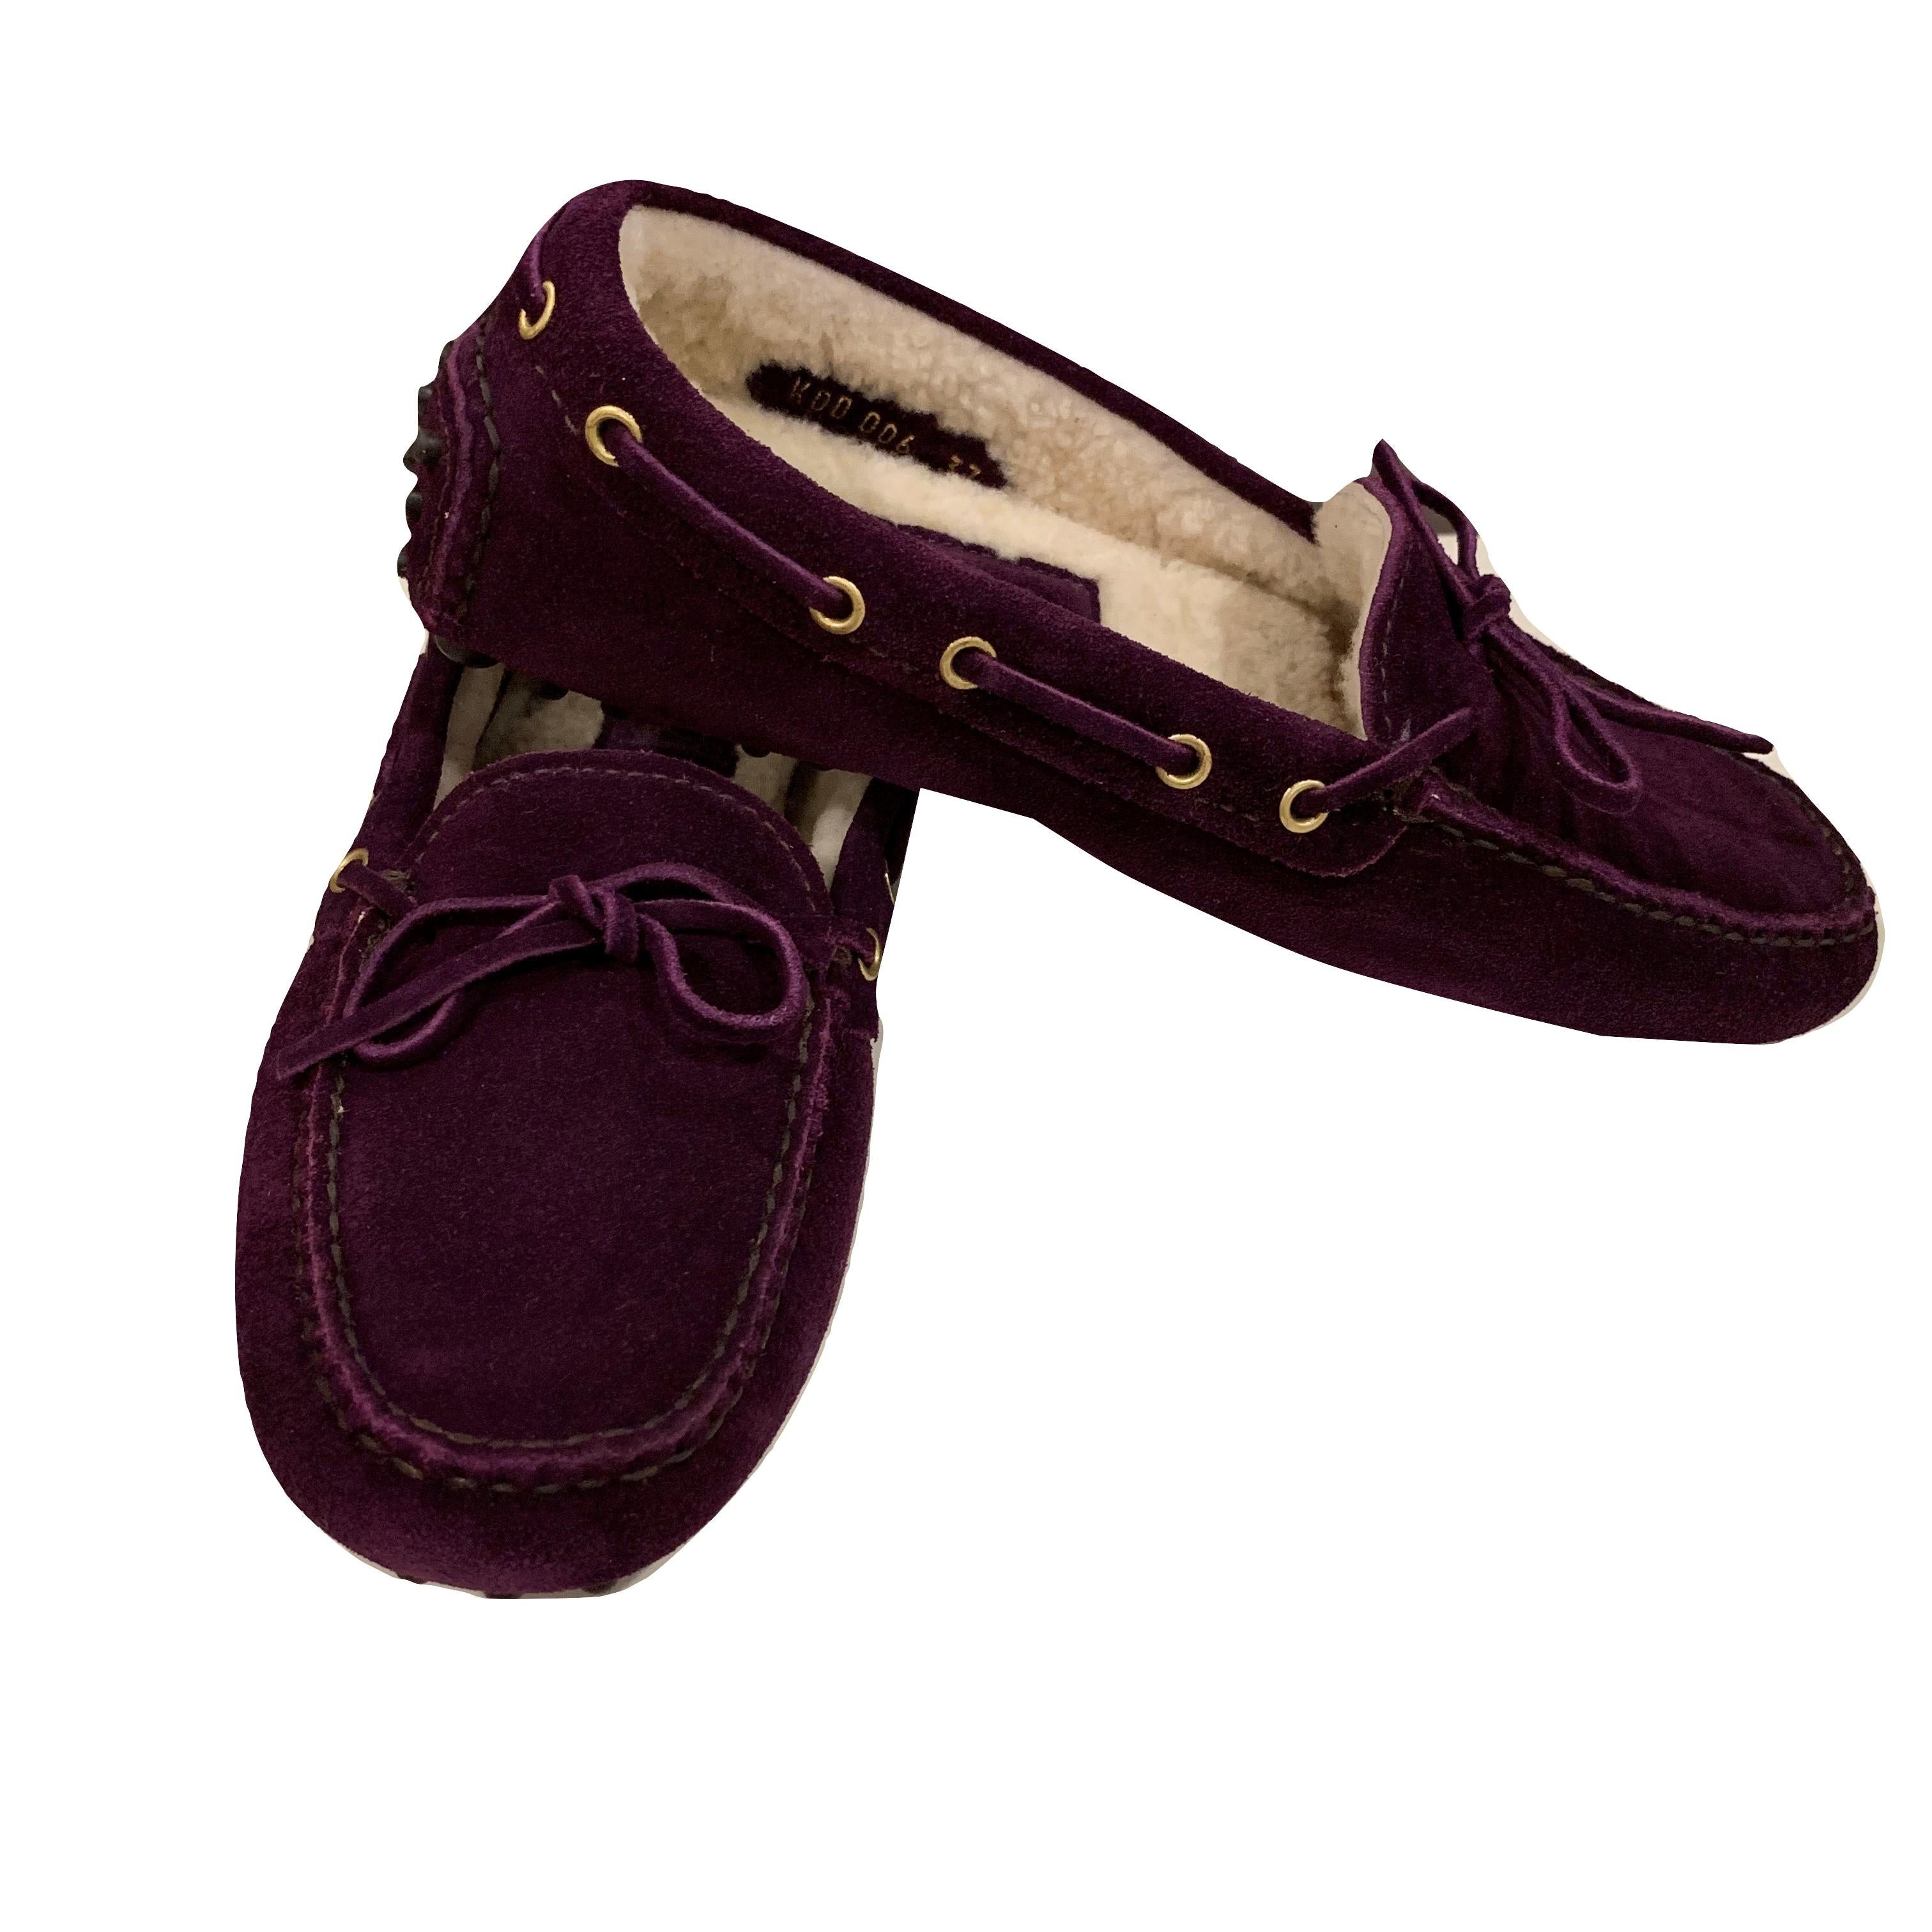  New The Original Prada Car Shoe Flat Moccasin Shearling House Driving  Sz 36 In New Condition In Leesburg, VA